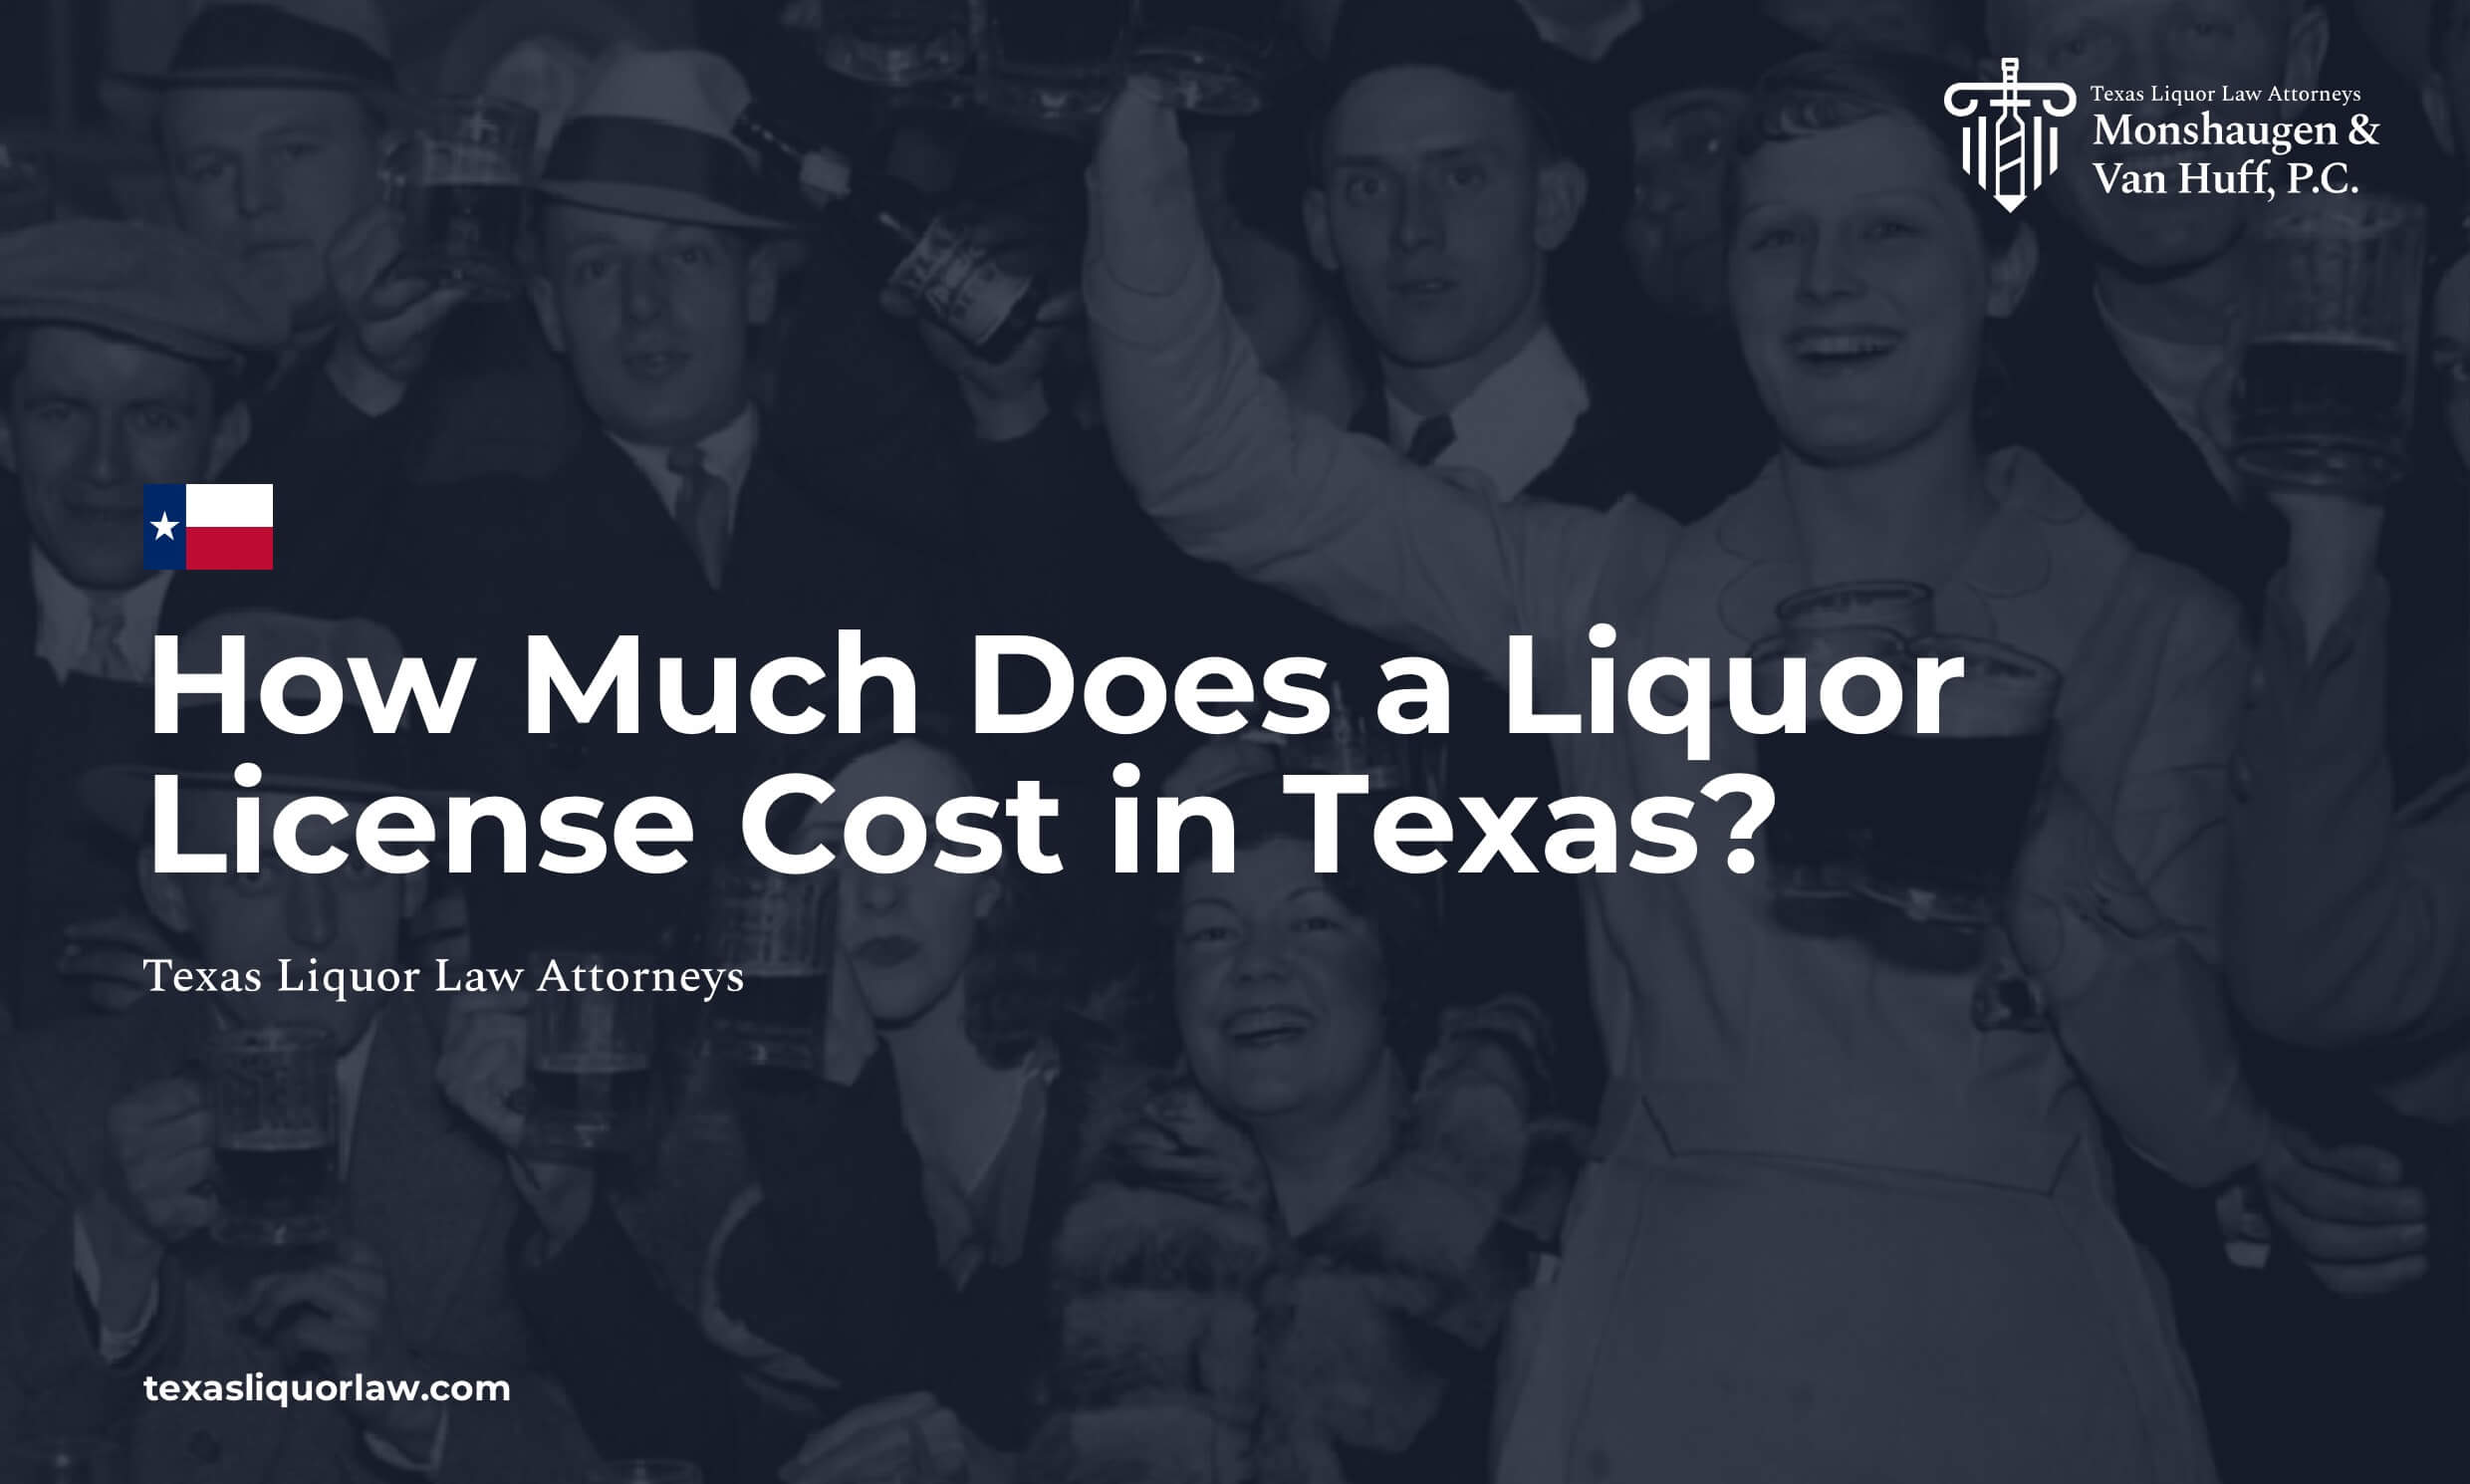 How Much Does a Liquor License Cost in Texas?